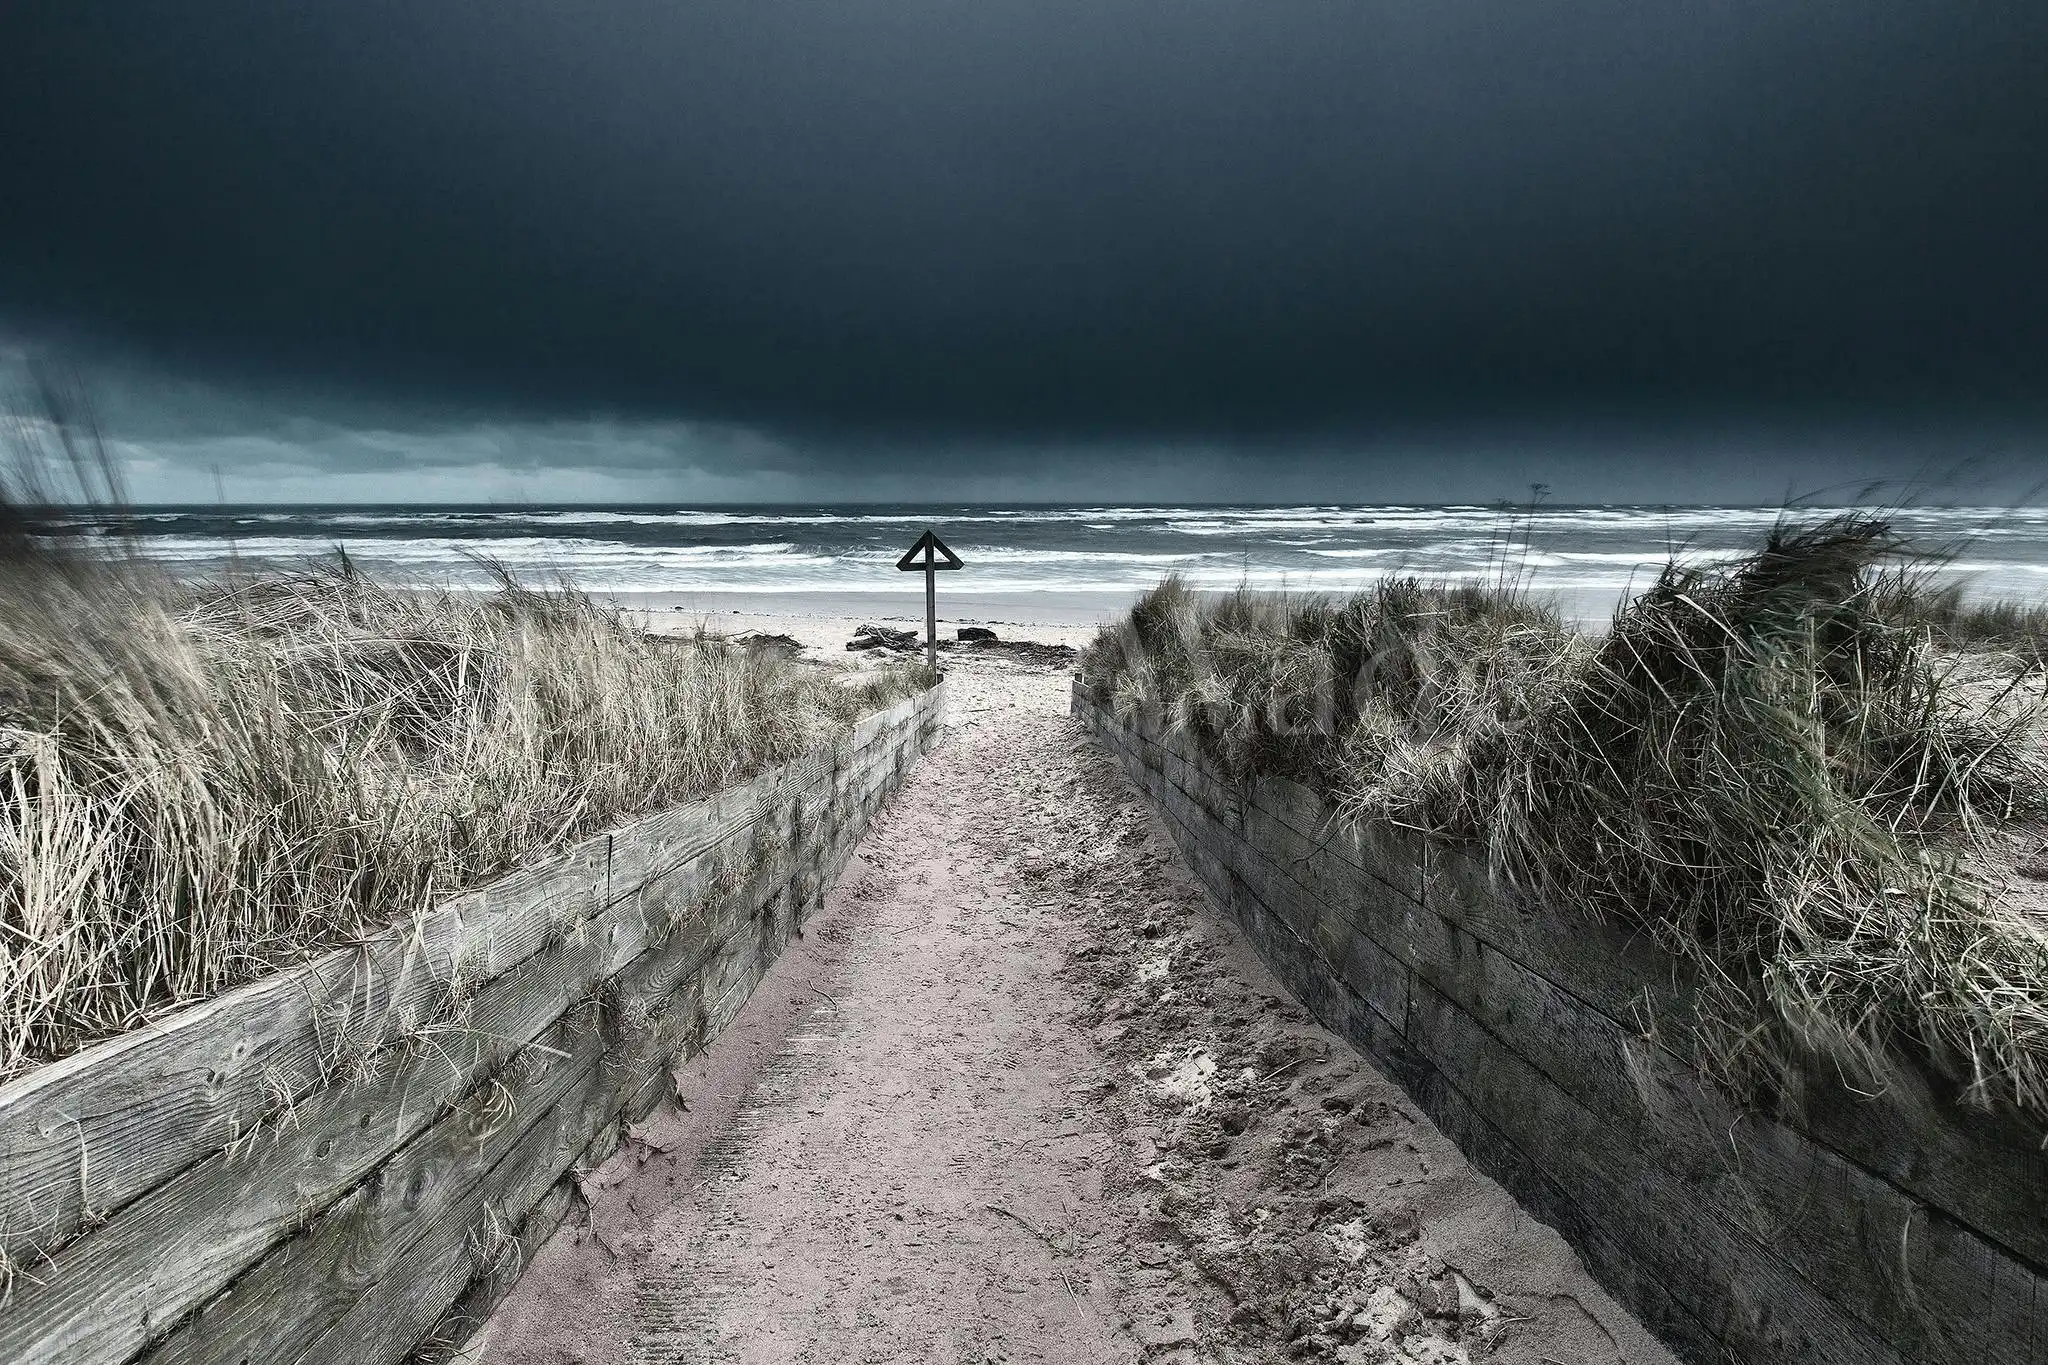 An approaching storm, Alnmouth